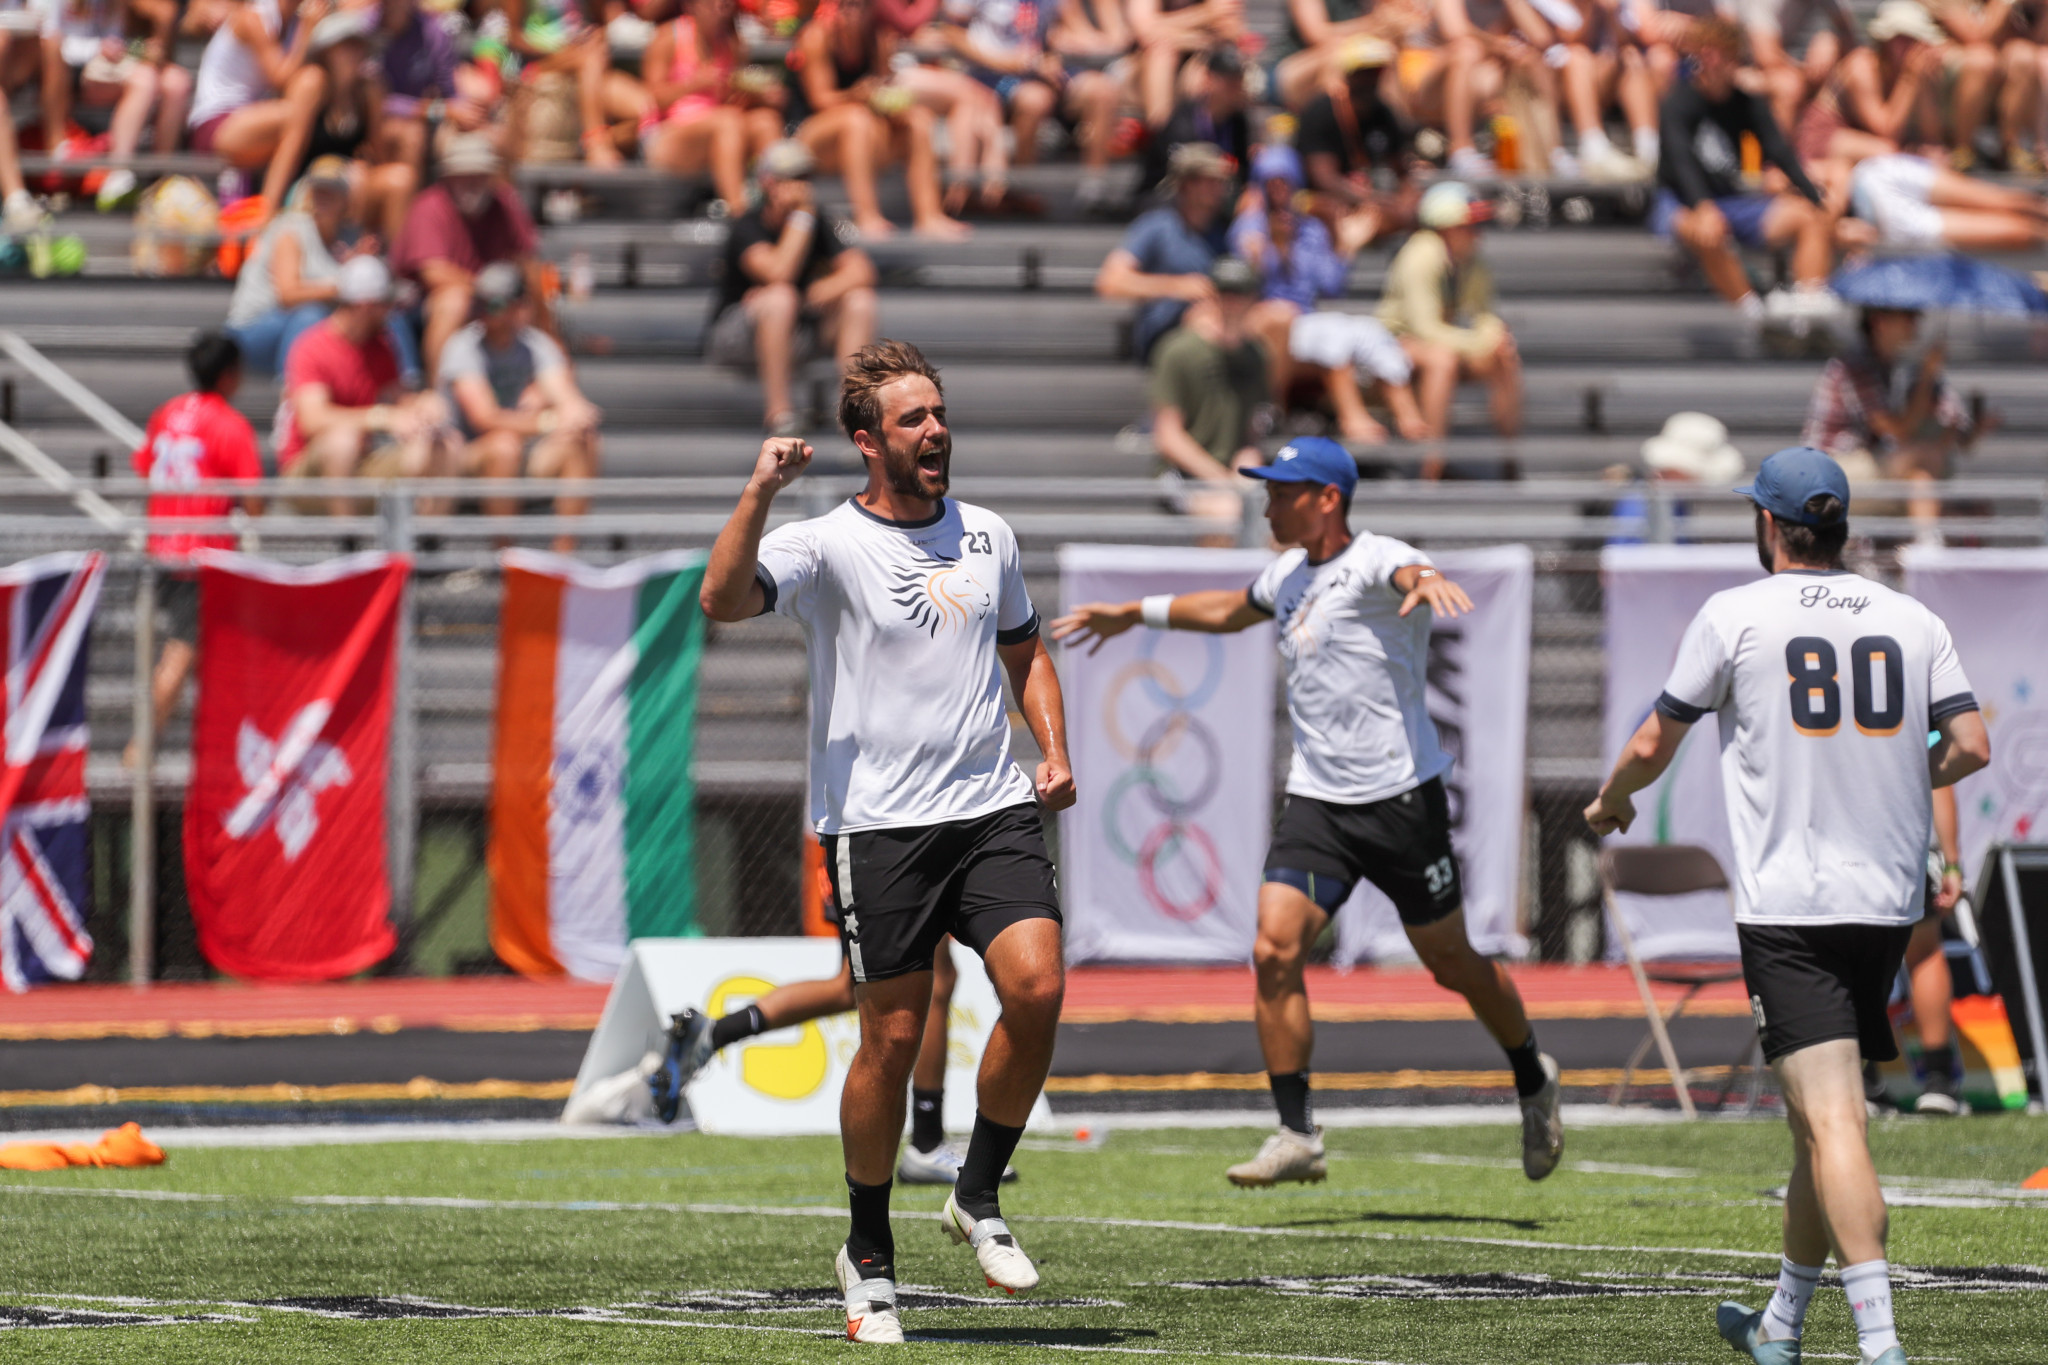 PoNY's Jimmy Mickle celebrated their tight victory over Raleigh Ring of Fire in the men's division final ©Paul Rutherford for UltiPhotos